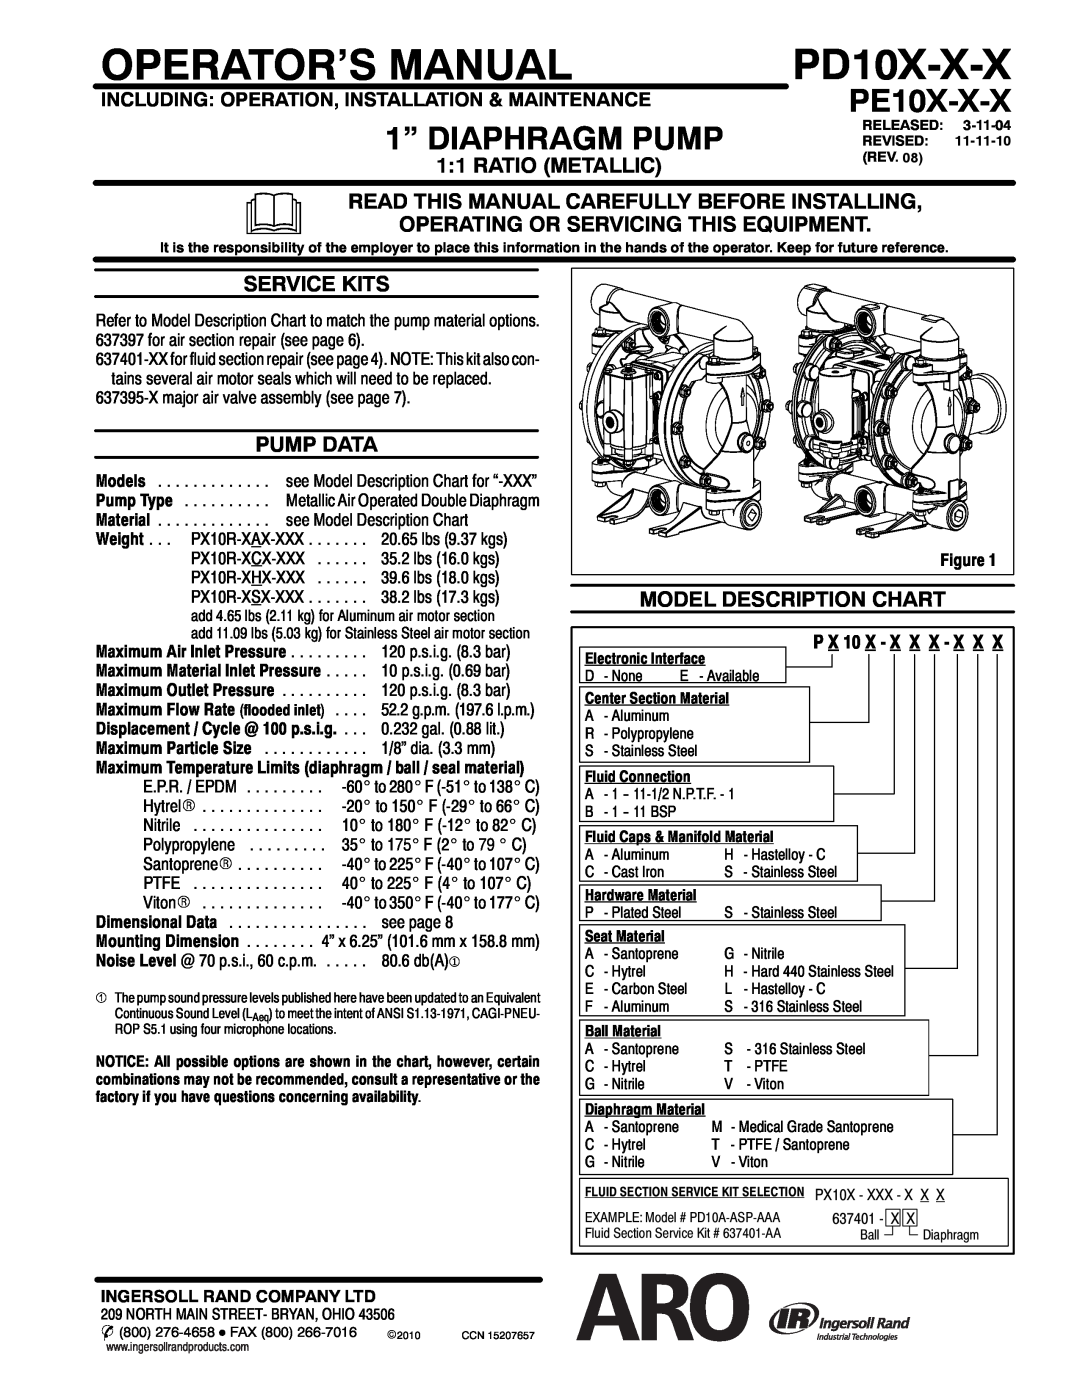 Ingersoll-Rand PE10X-X-X manual Read This Manual Carefully Before Installing, Operating Or Servicing This Equipment 